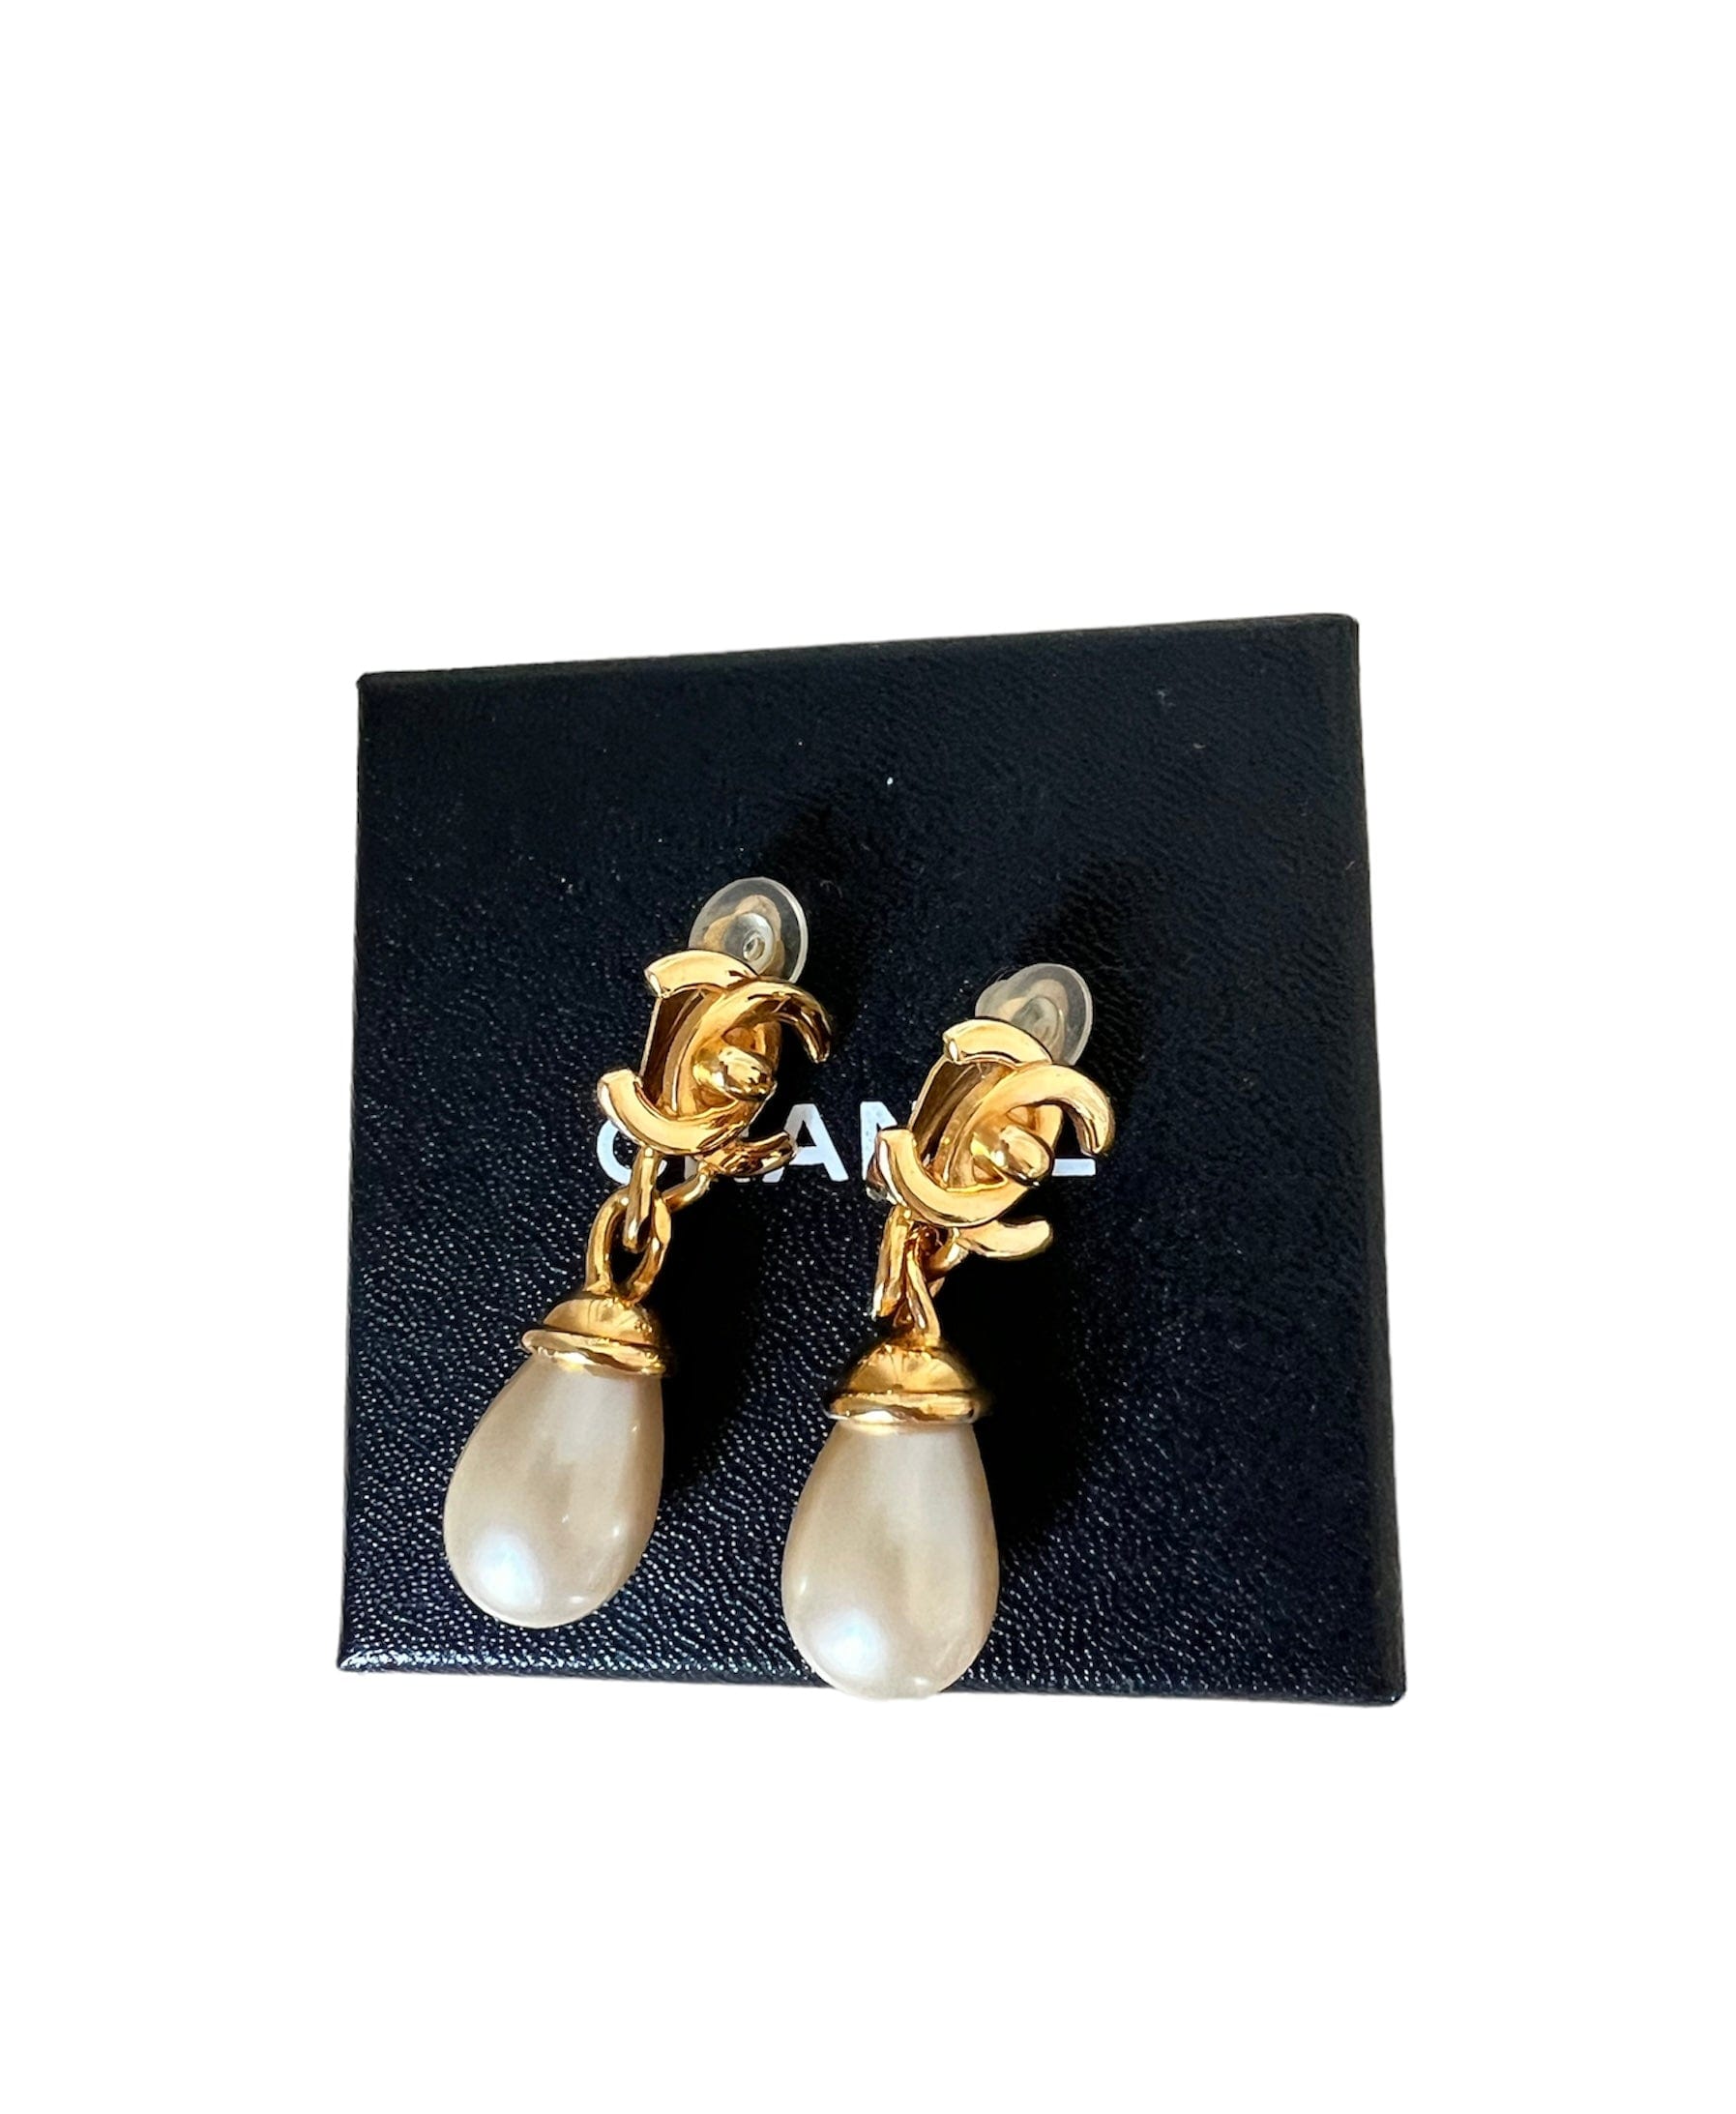 Chanel Vintage Small Turnlock with Pearl Drop Earrings with box PXL2467